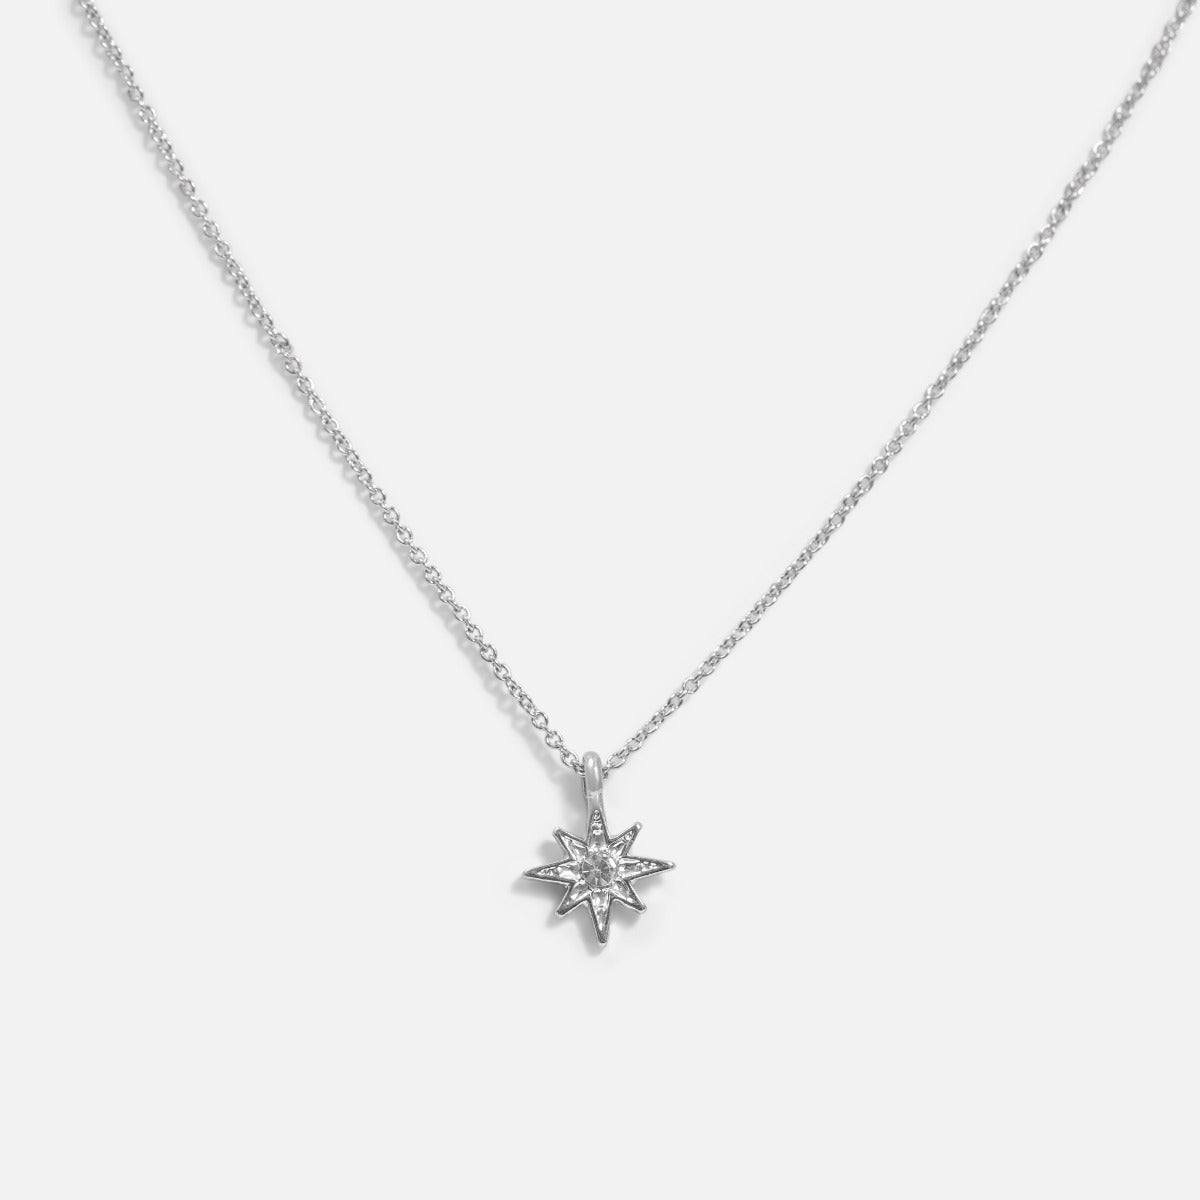 Silver pendant with star charm